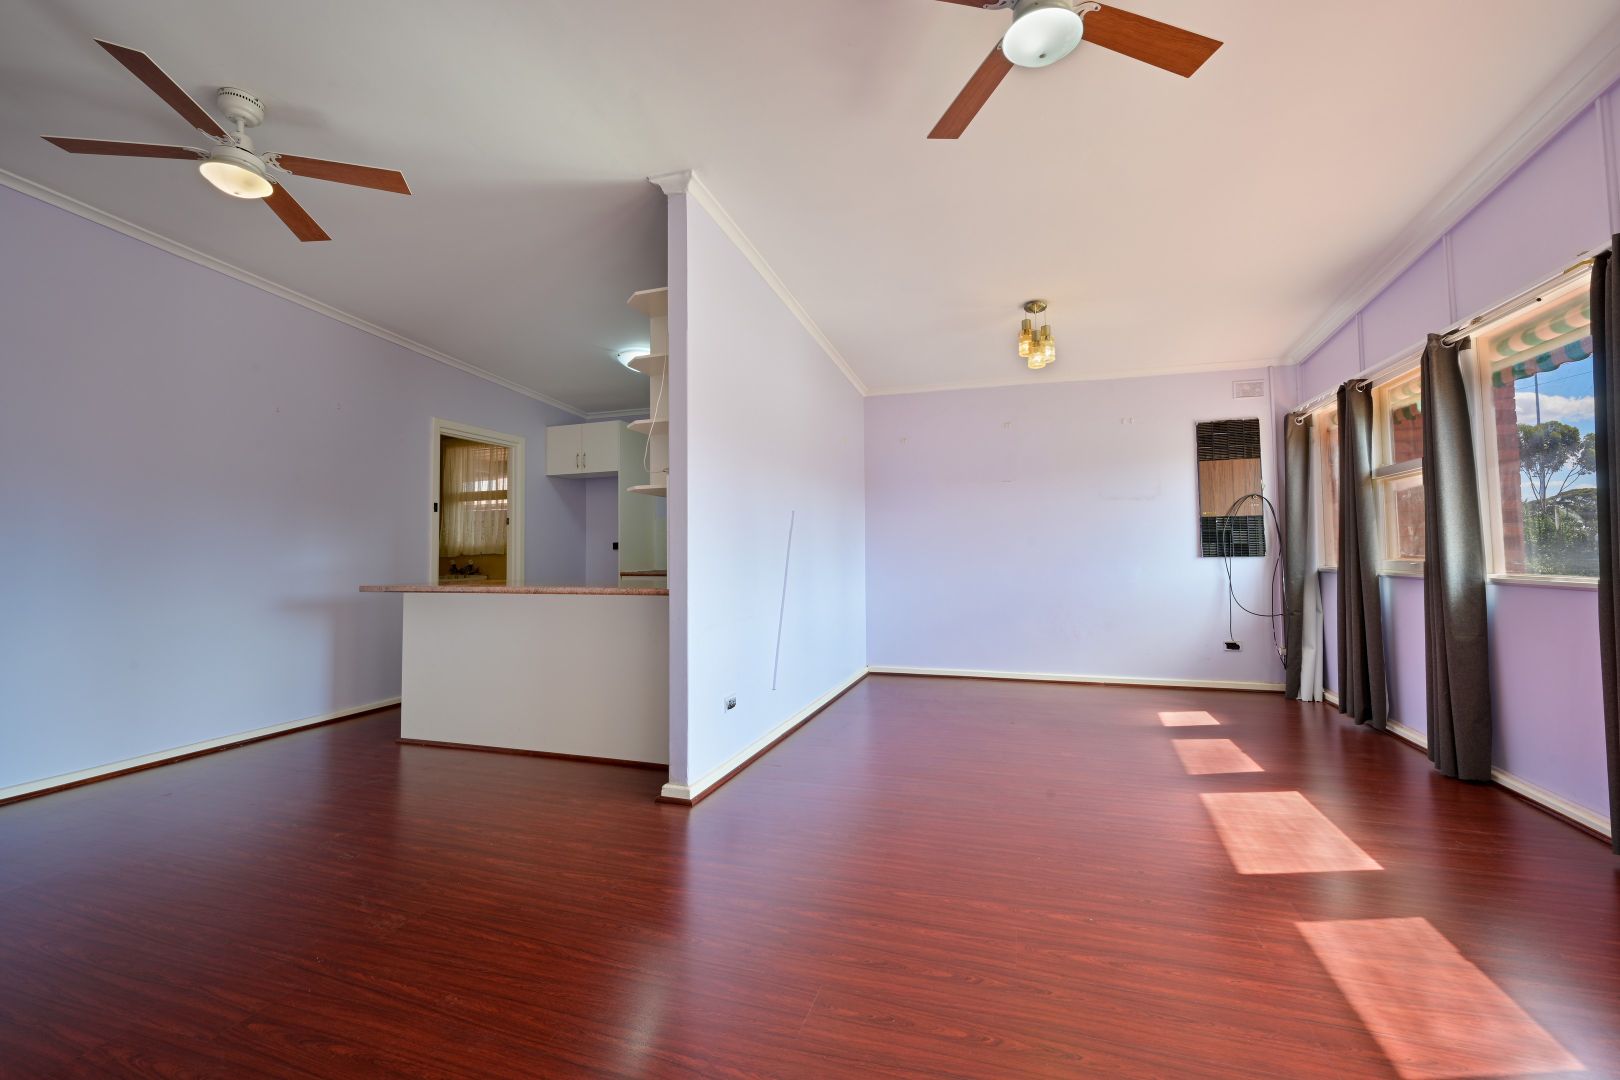 71 Viscount Slim Avenue, Whyalla Norrie SA 5608, Image 1